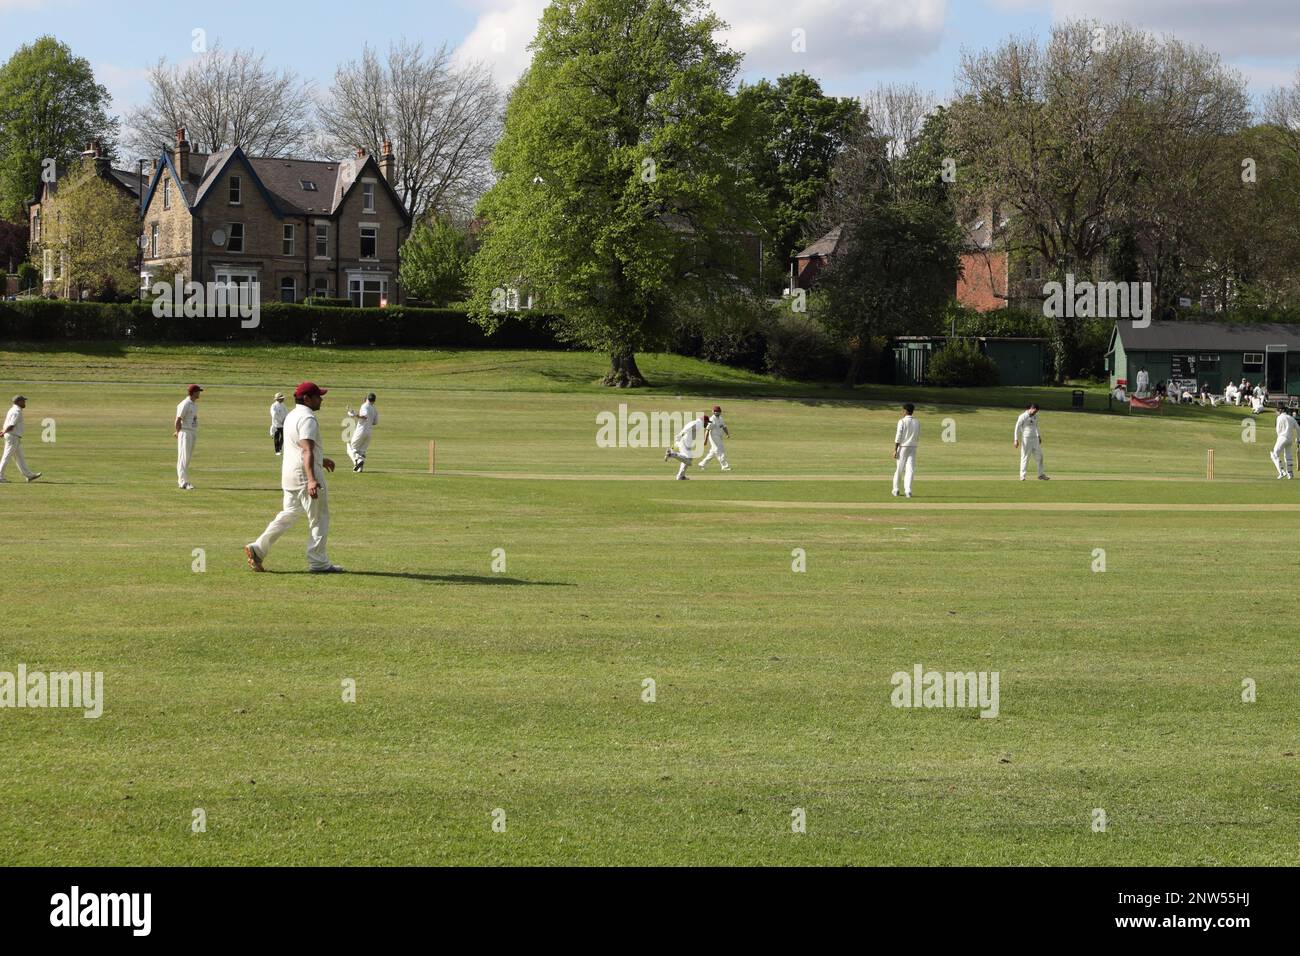 Local Cricket match in Millhouses Park Sheffield England Stock Photo